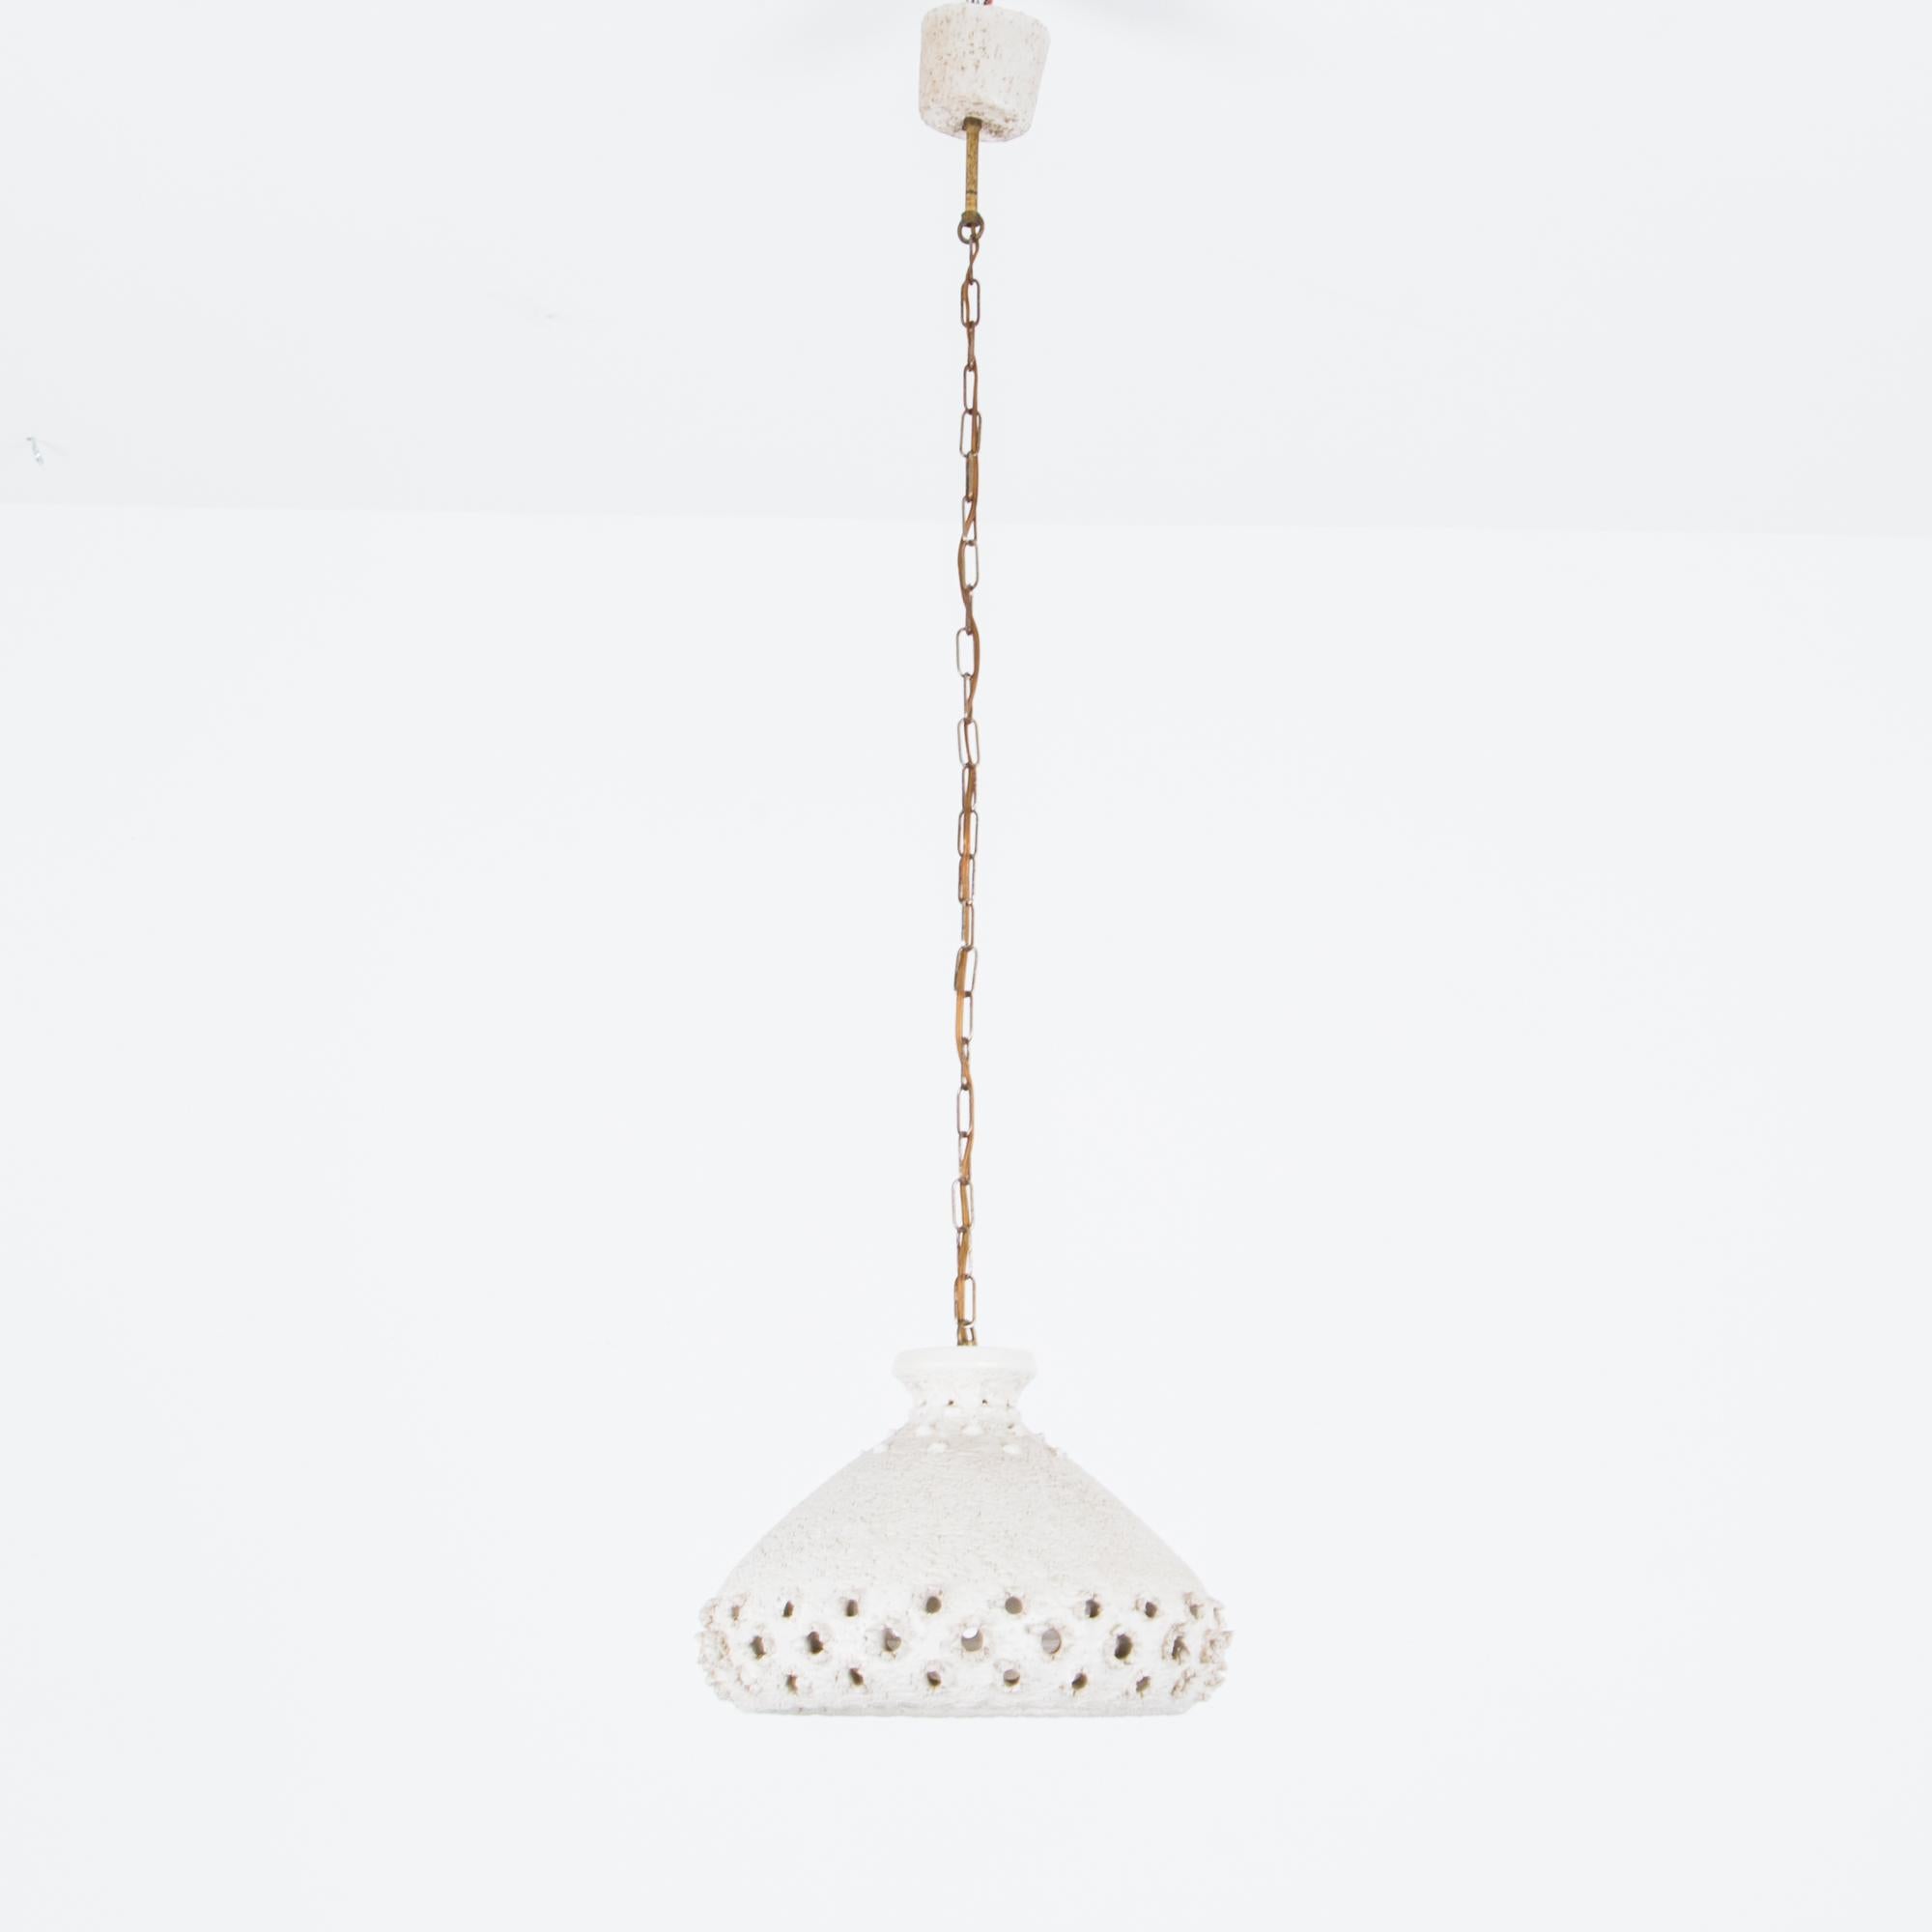 This pendant light was made in Denmark in the 1960s, and features a white ceramic light fixture suspended from a ceiling chain. The rough, unglazed texture of the ceramic fixture contrasts appealingly with its pretty, lace-like pattern, for an